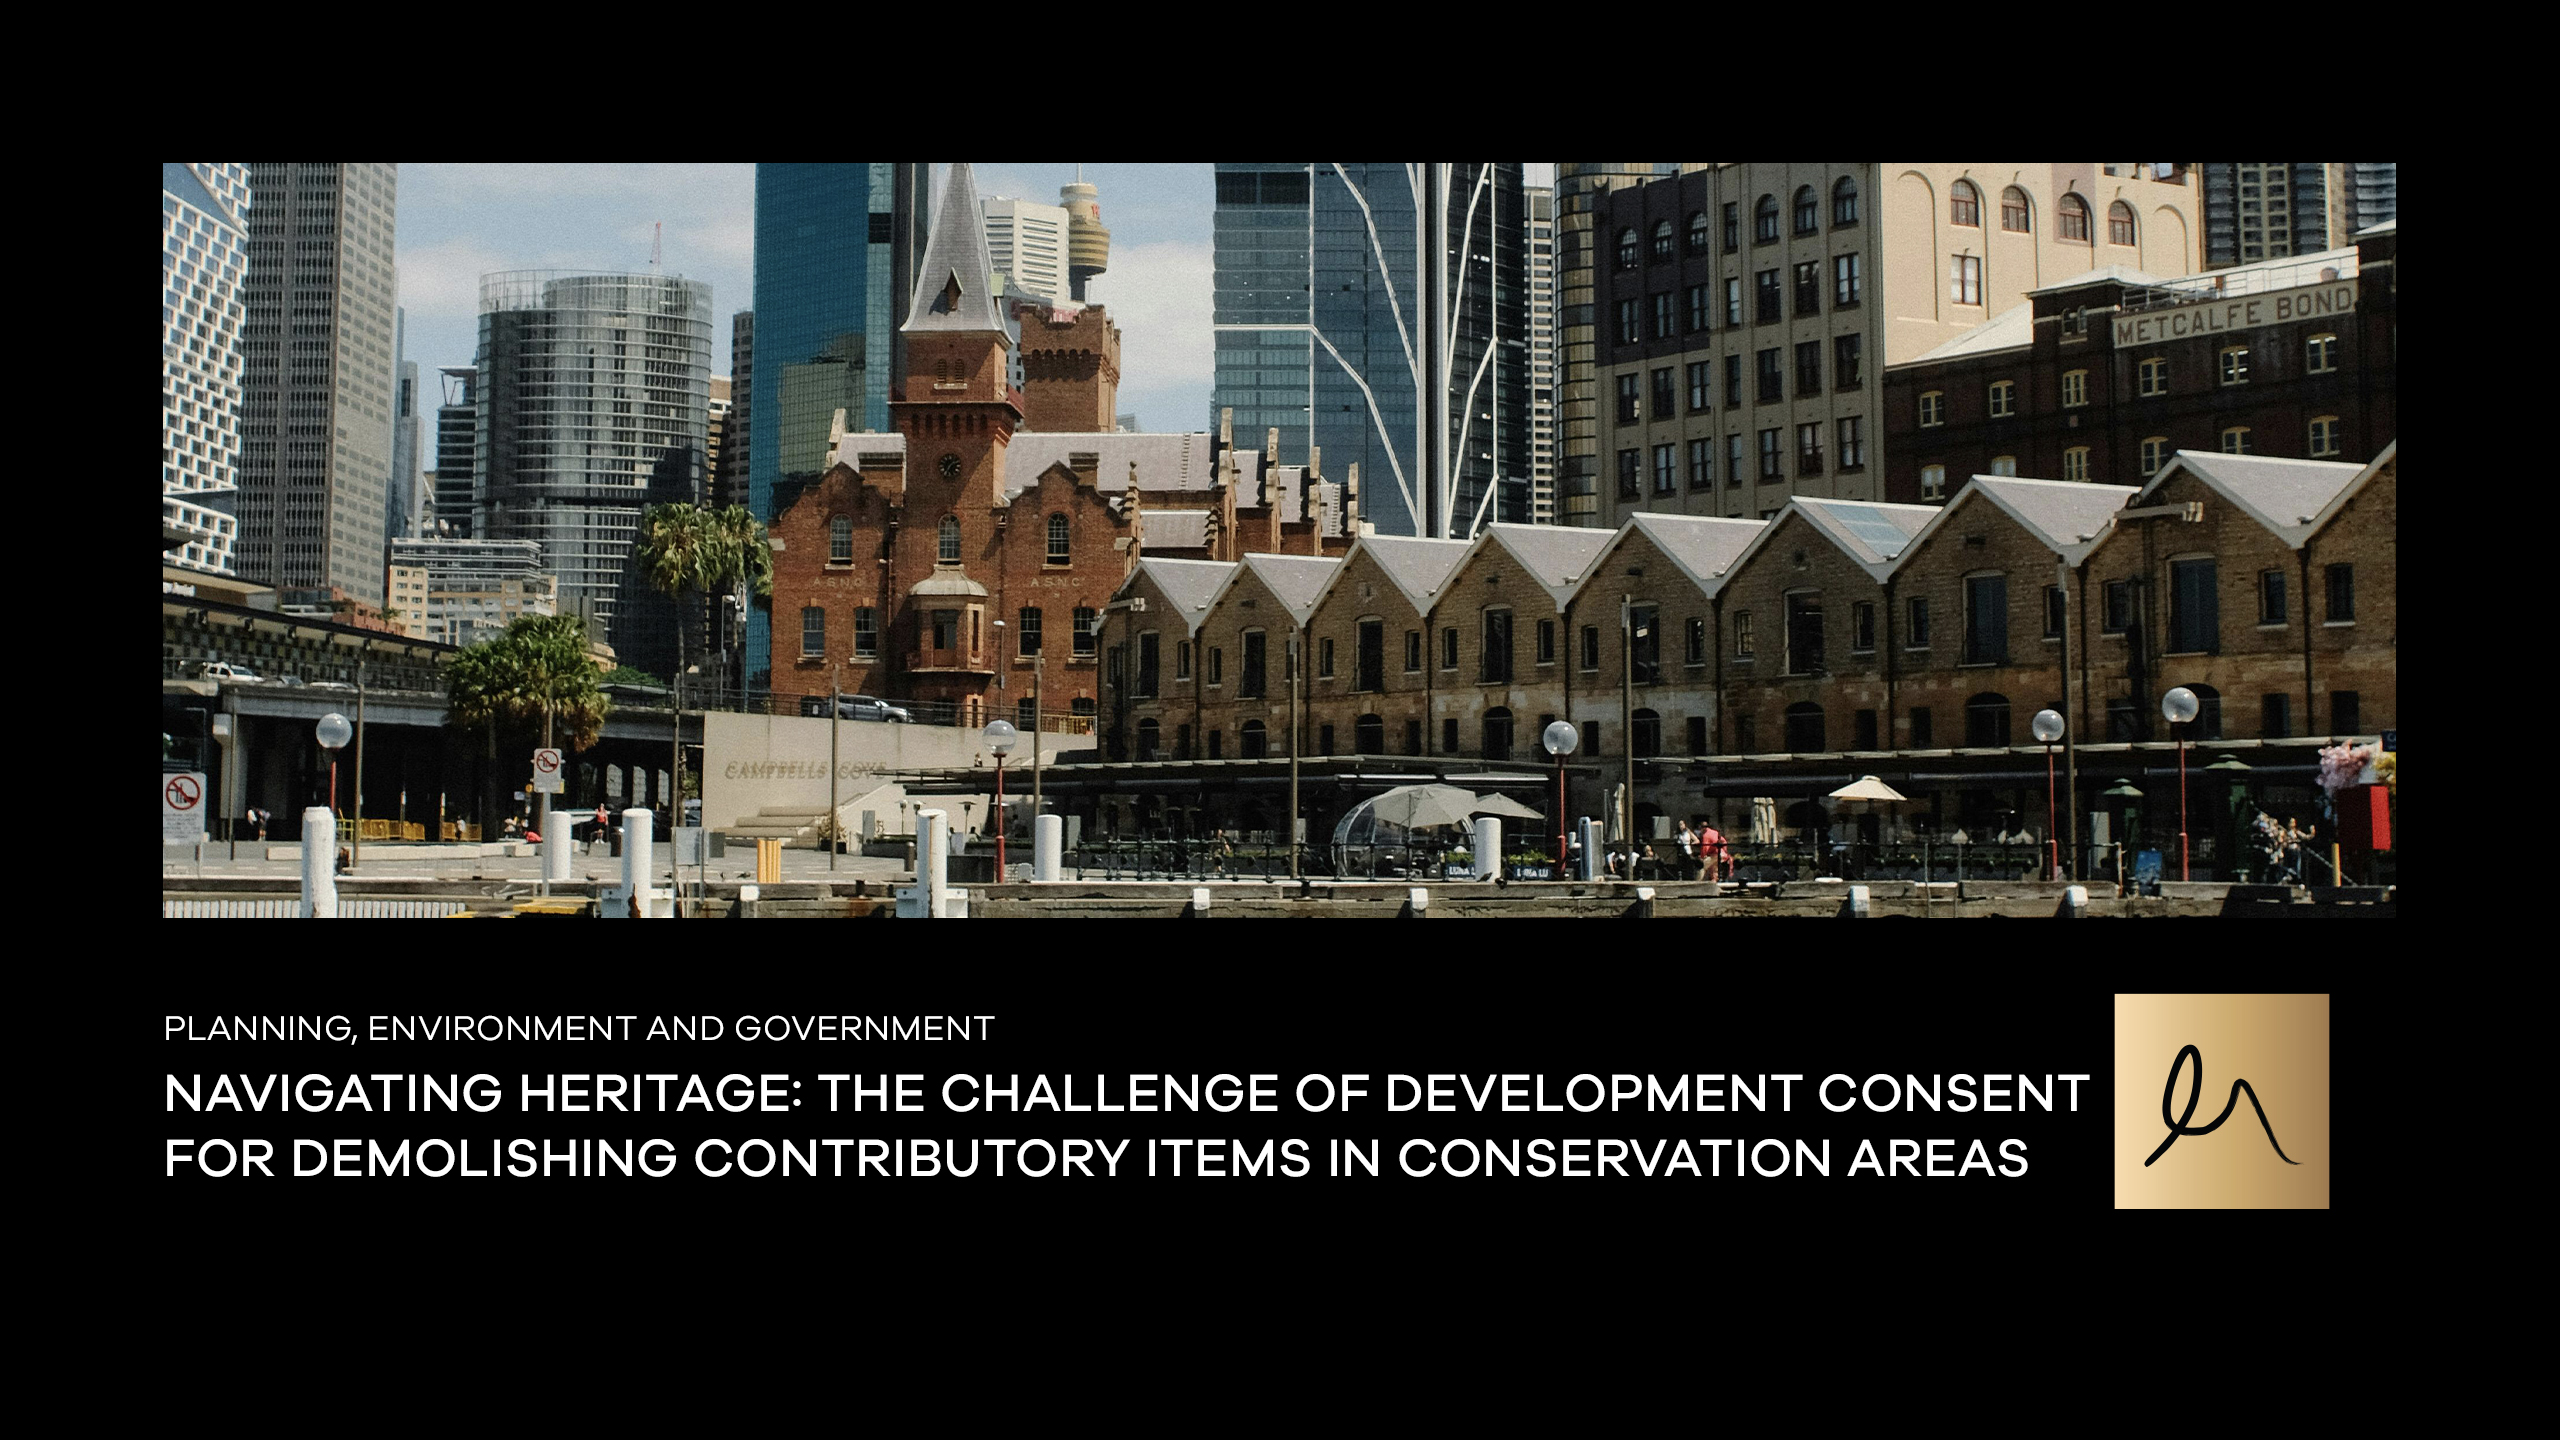 Navigating Heritage: The Challenge of Development Consent for Demolishing Contributory Items in Conservation Areas